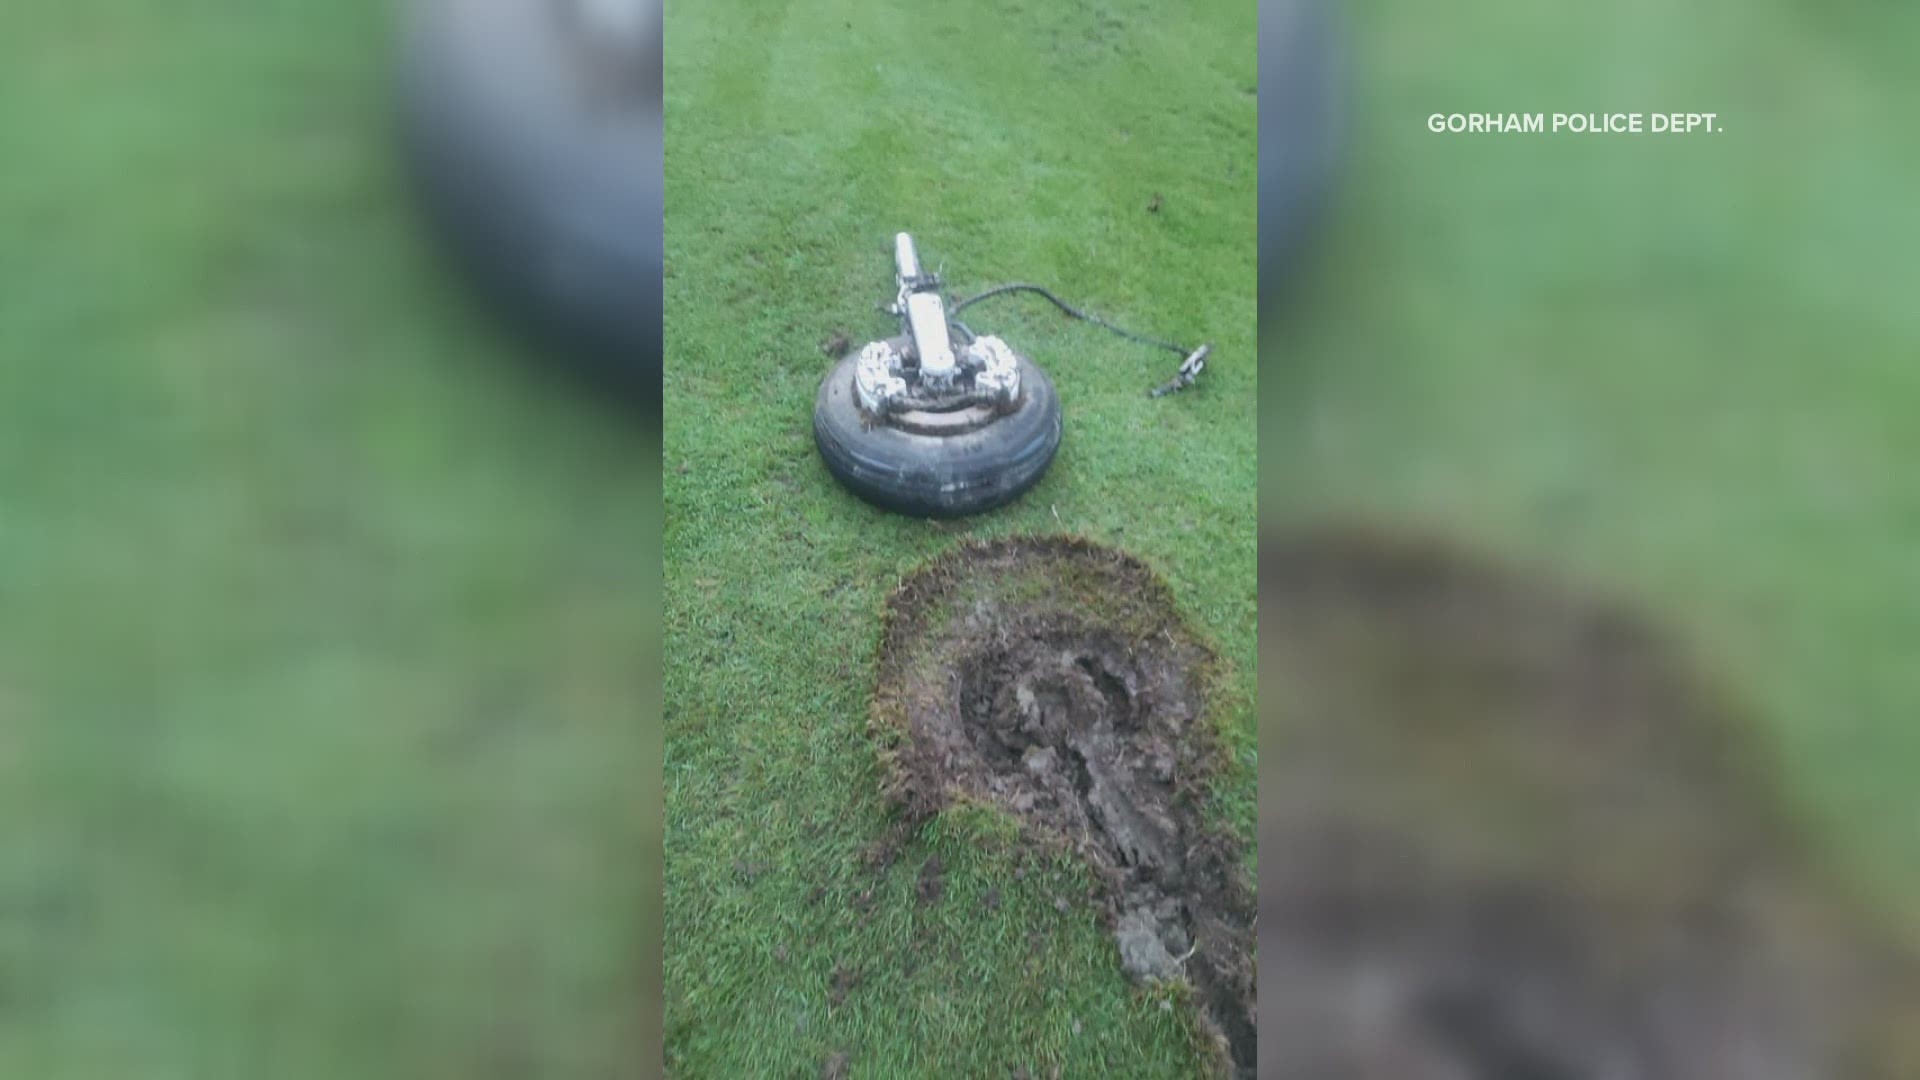 A roughly 100lbs piece of landing gear from an airplane fell from the sky and landed right on the 7th fairway at the Gorham Country Club.